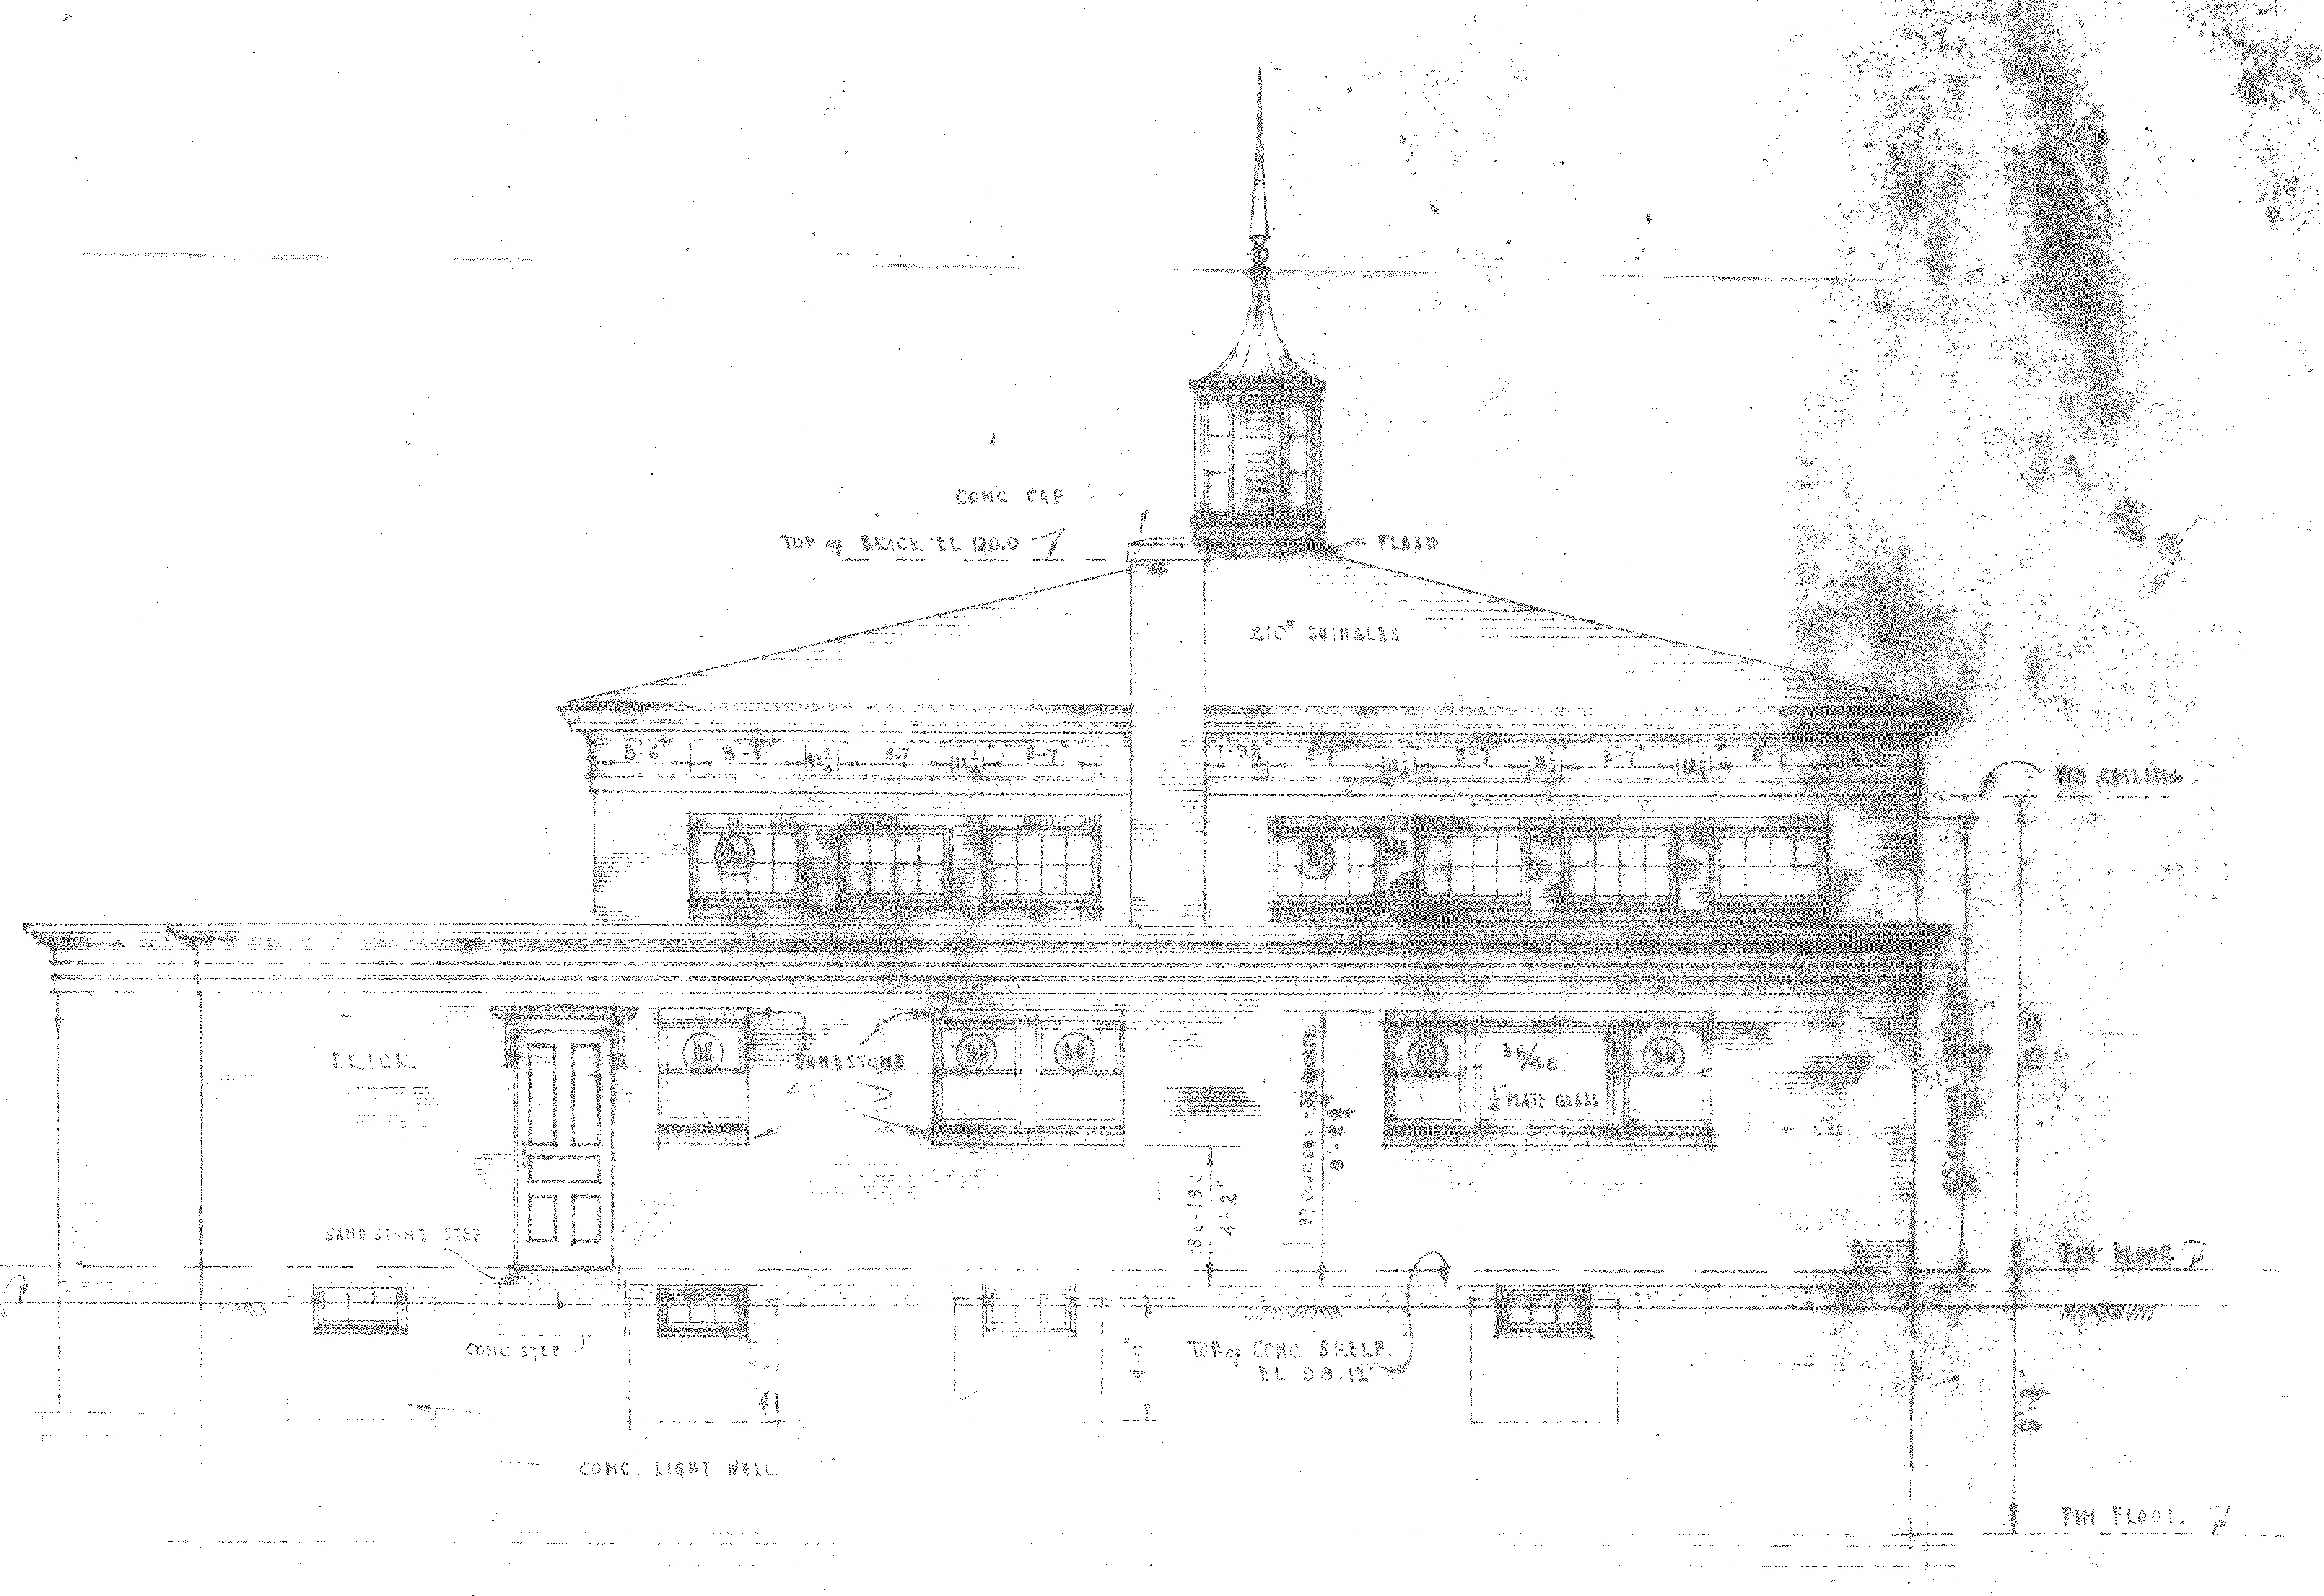 Image is a faded copy of a side elevation of a fire station